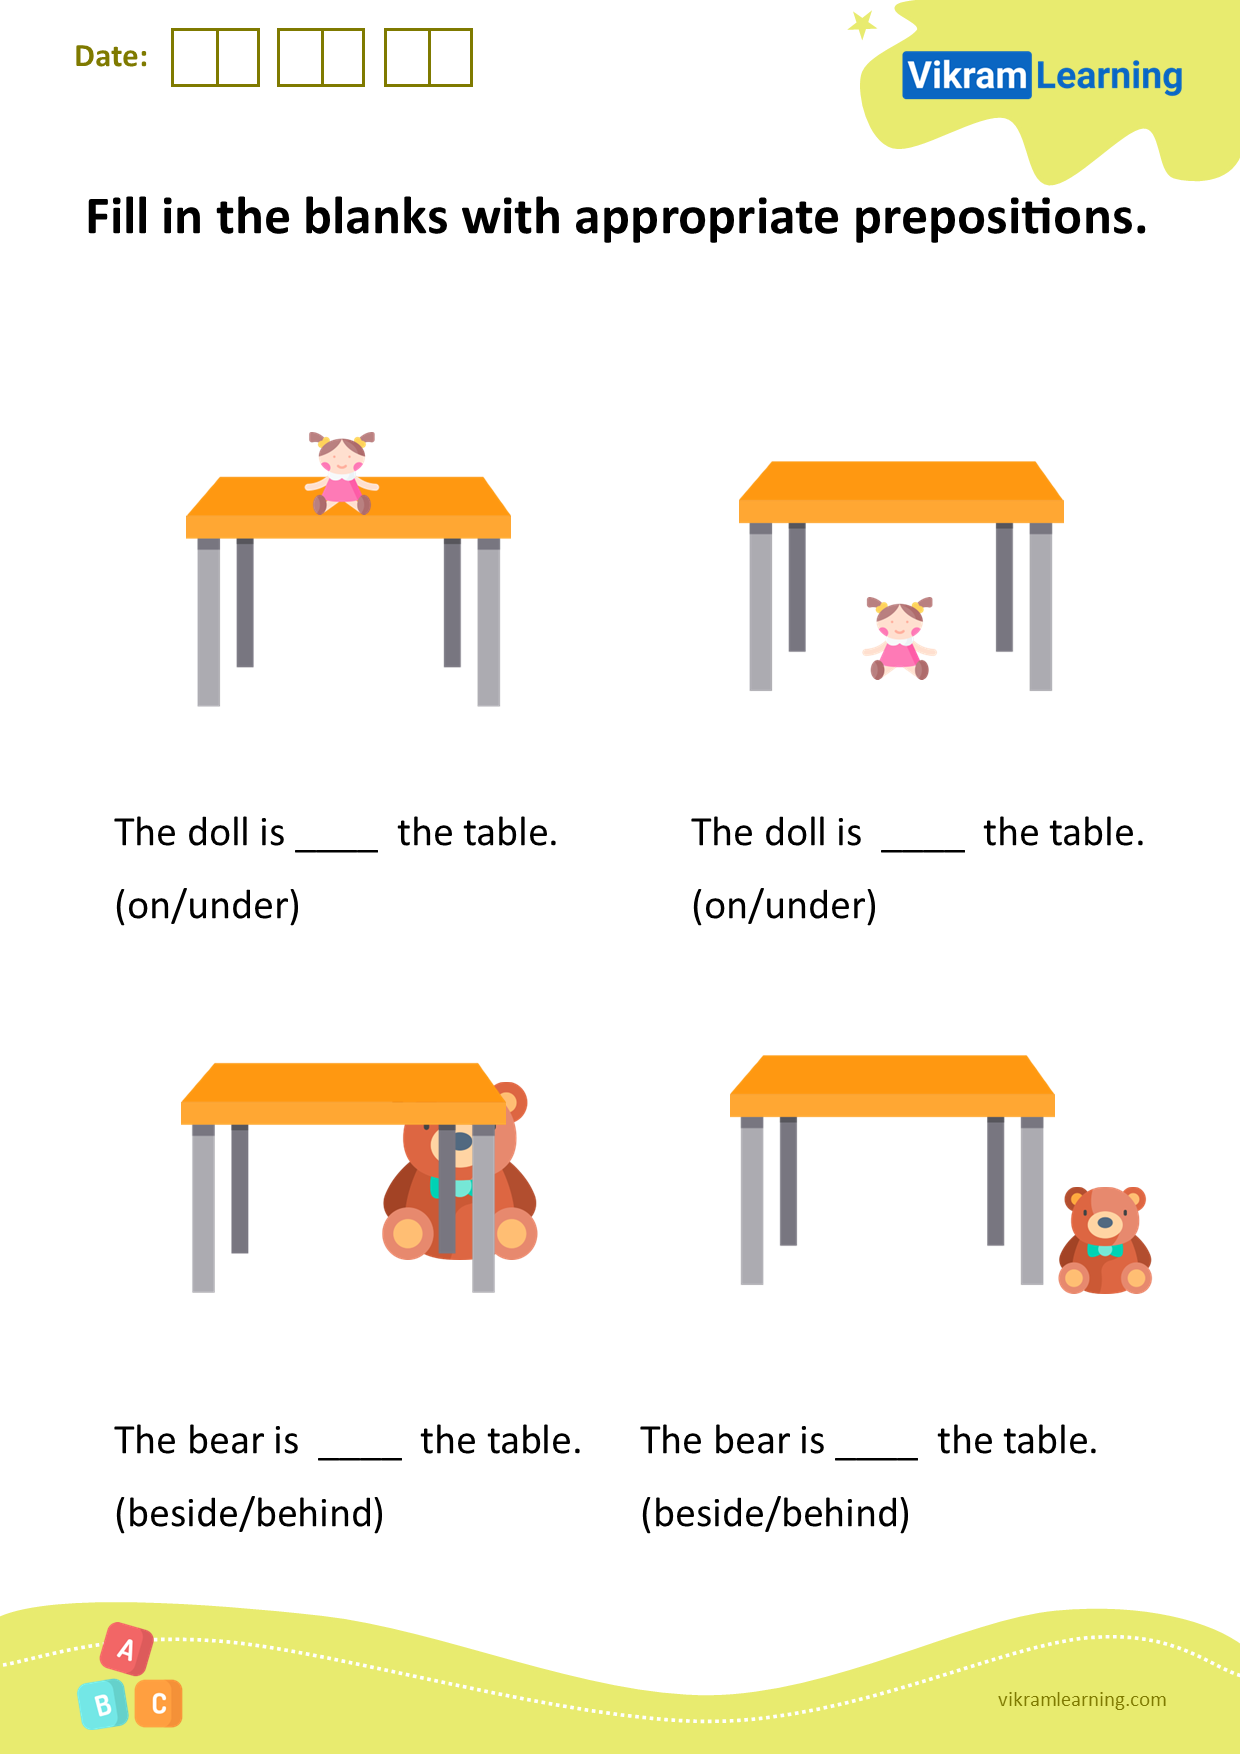 download-fill-in-the-blanks-with-appropriate-prepositions-worksheets